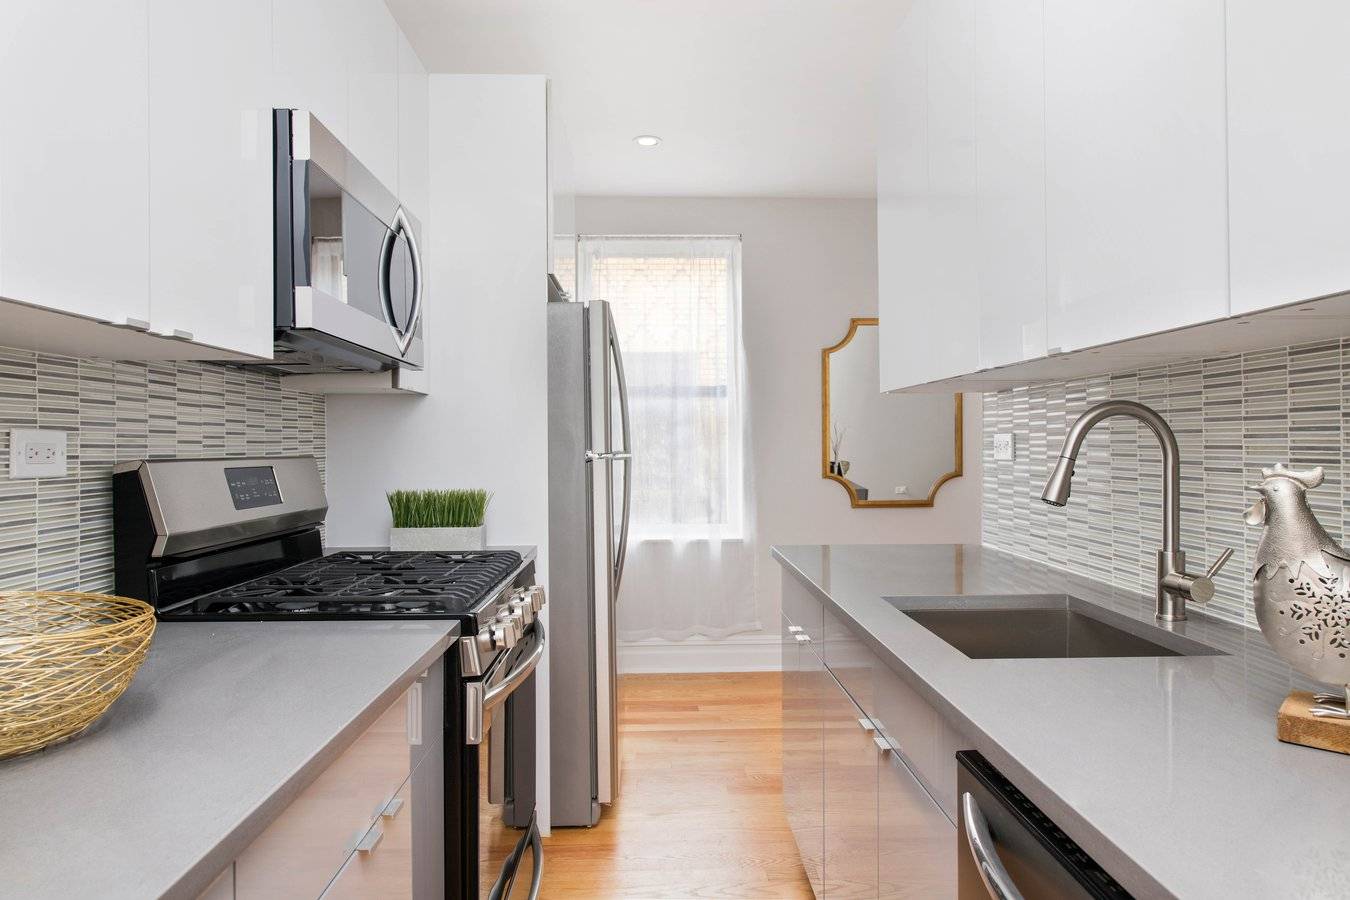 Modern, gut renovated one bedroom, one bath apartment featuring new oak hardwood floors, a spacious living room, separate kitchen with Quartz counter tops, abundant cabinet space, stainless steel appliances and ...